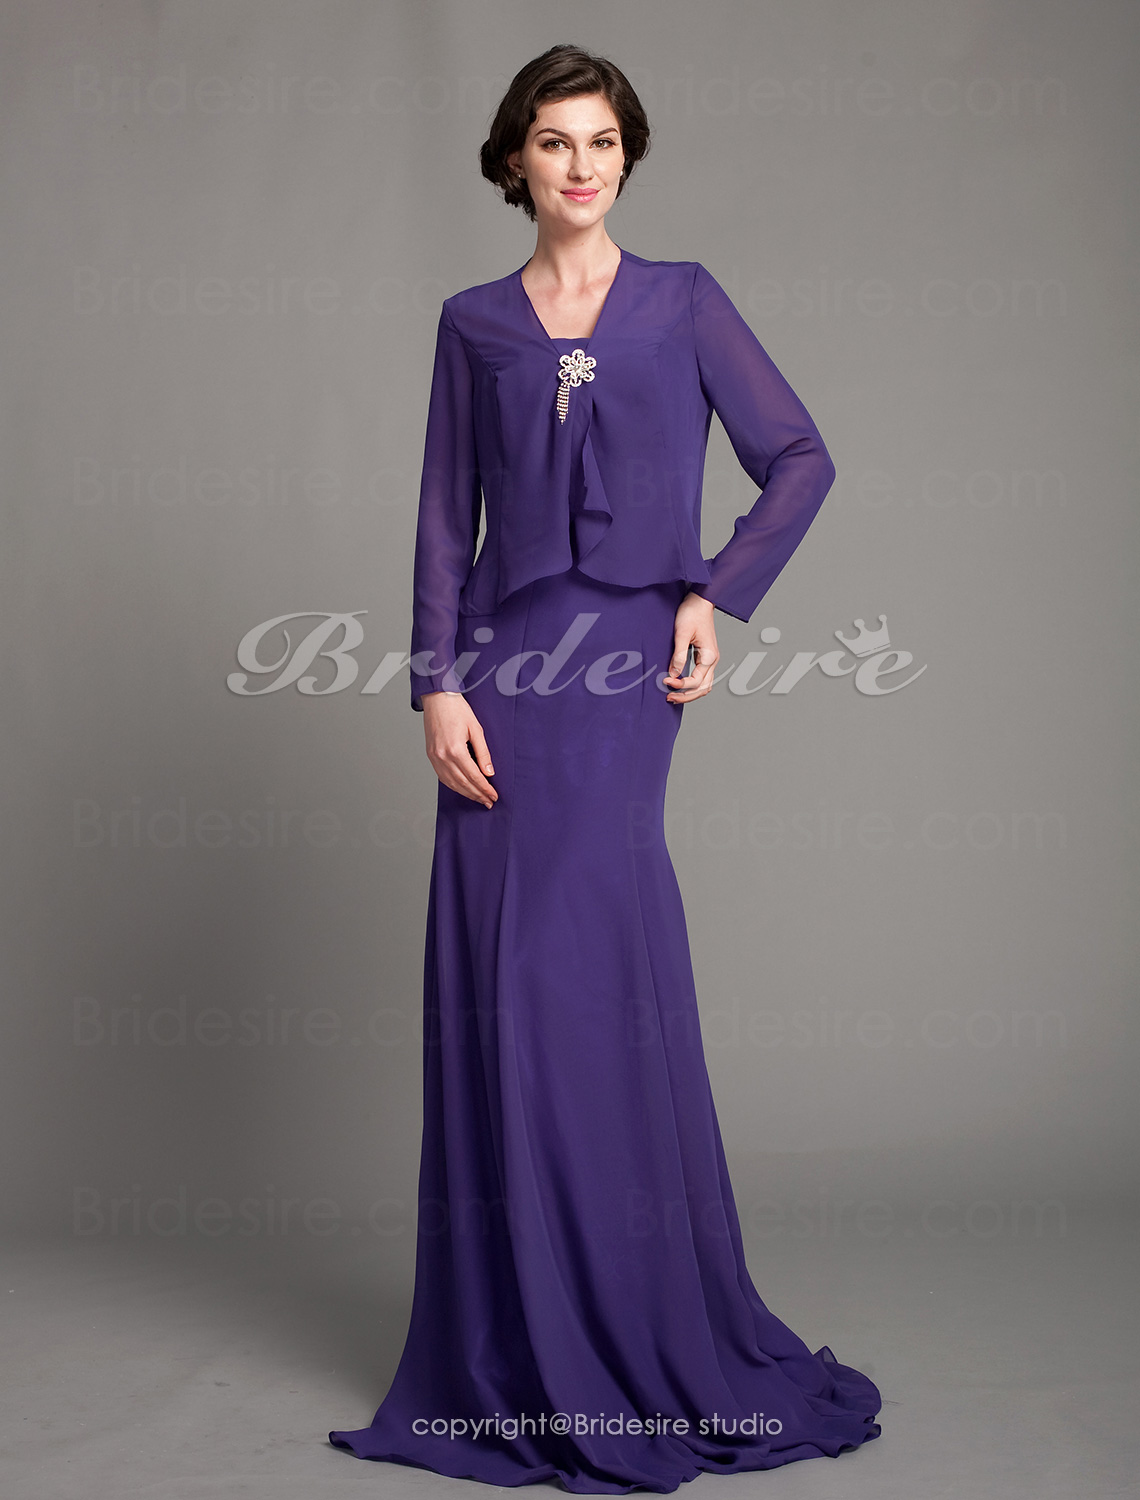 Trumpet/ Mermaid Chiffon Floor-length Strapless Mother of the Bride Dress With A Wrap